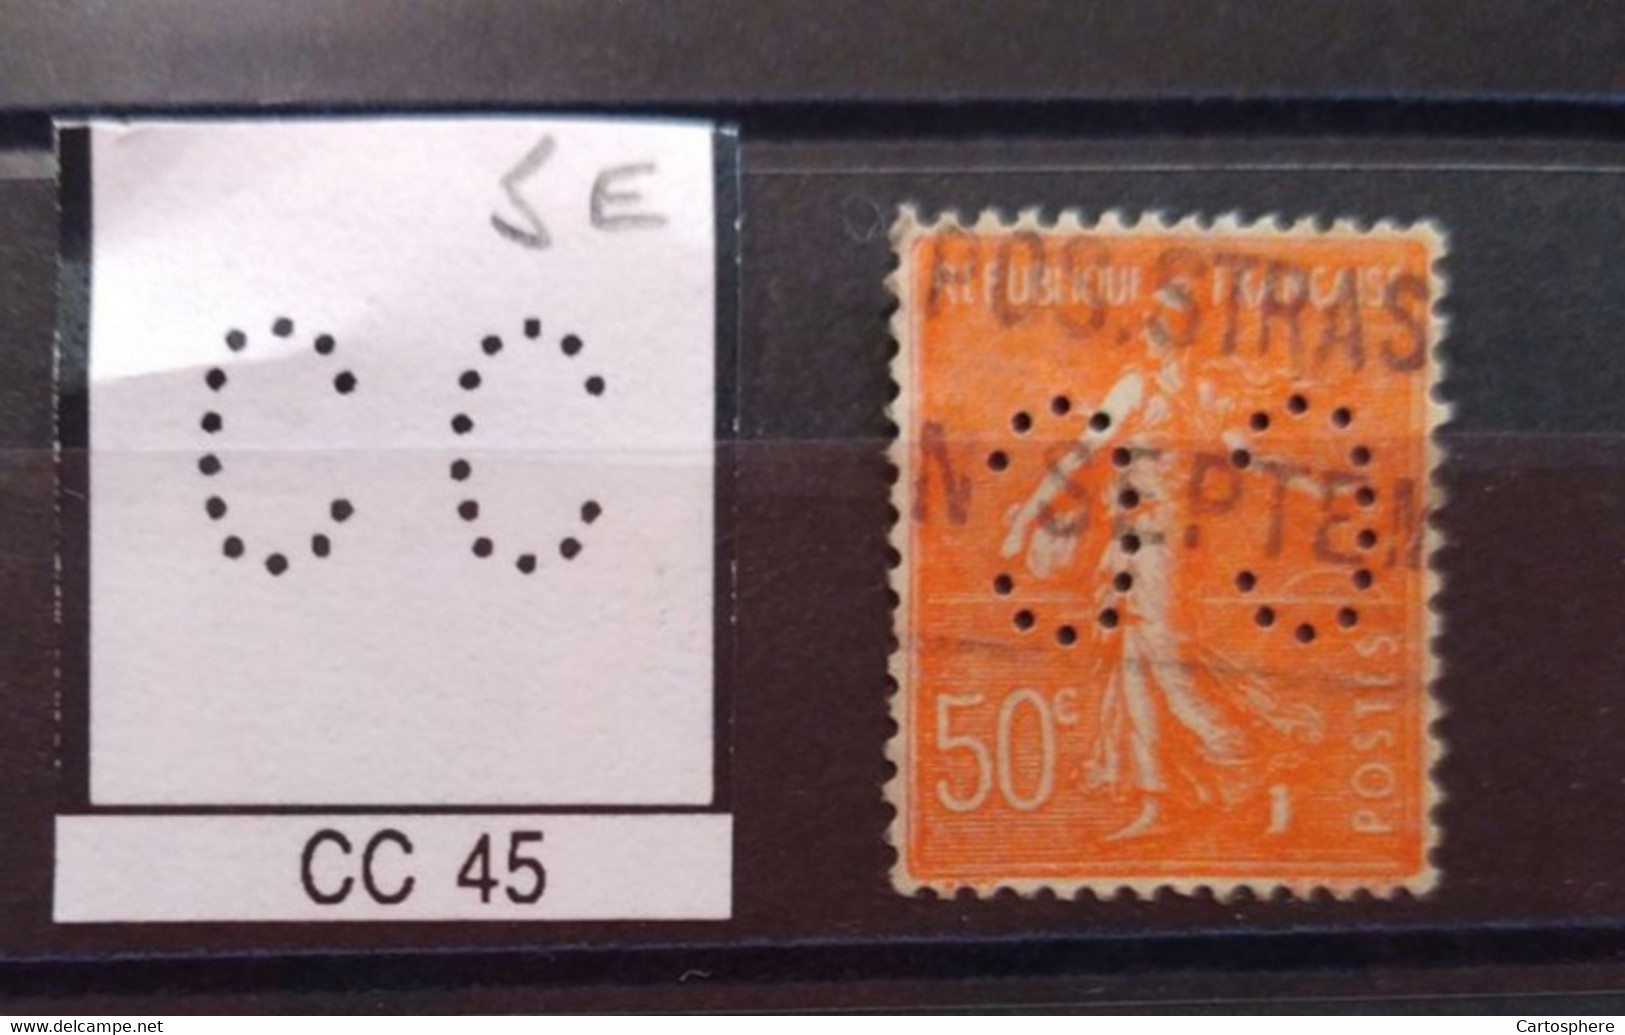 FRANCE  TIMBRE CC 45  INDICE 4 SUR 199 LIGNEE PERFORE PERFORES PERFIN PERFINS PERFO PERFORATION PERFORIERT - Used Stamps